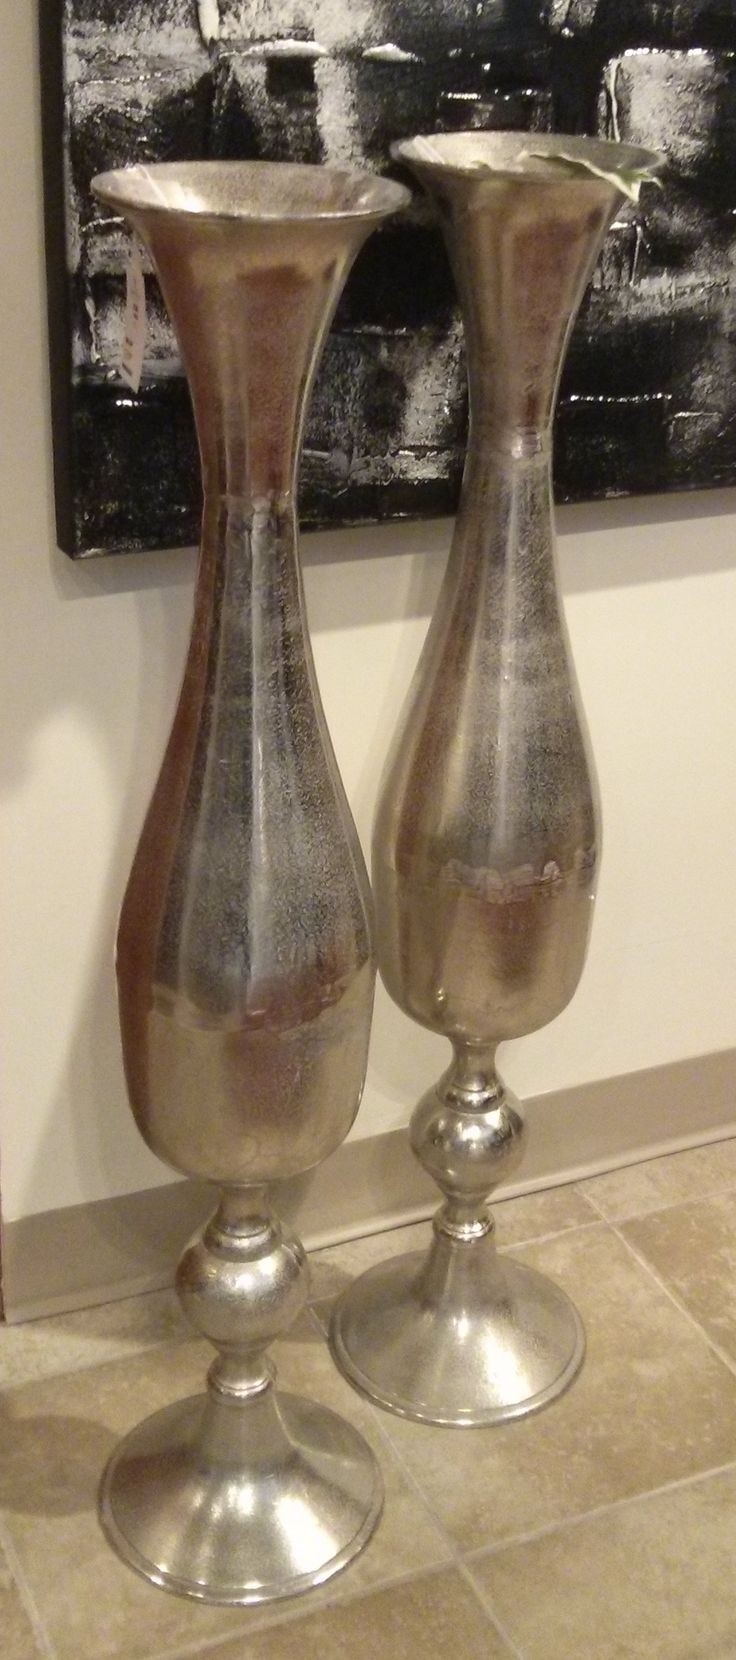 Accessories large silver vase visit our showroom we have